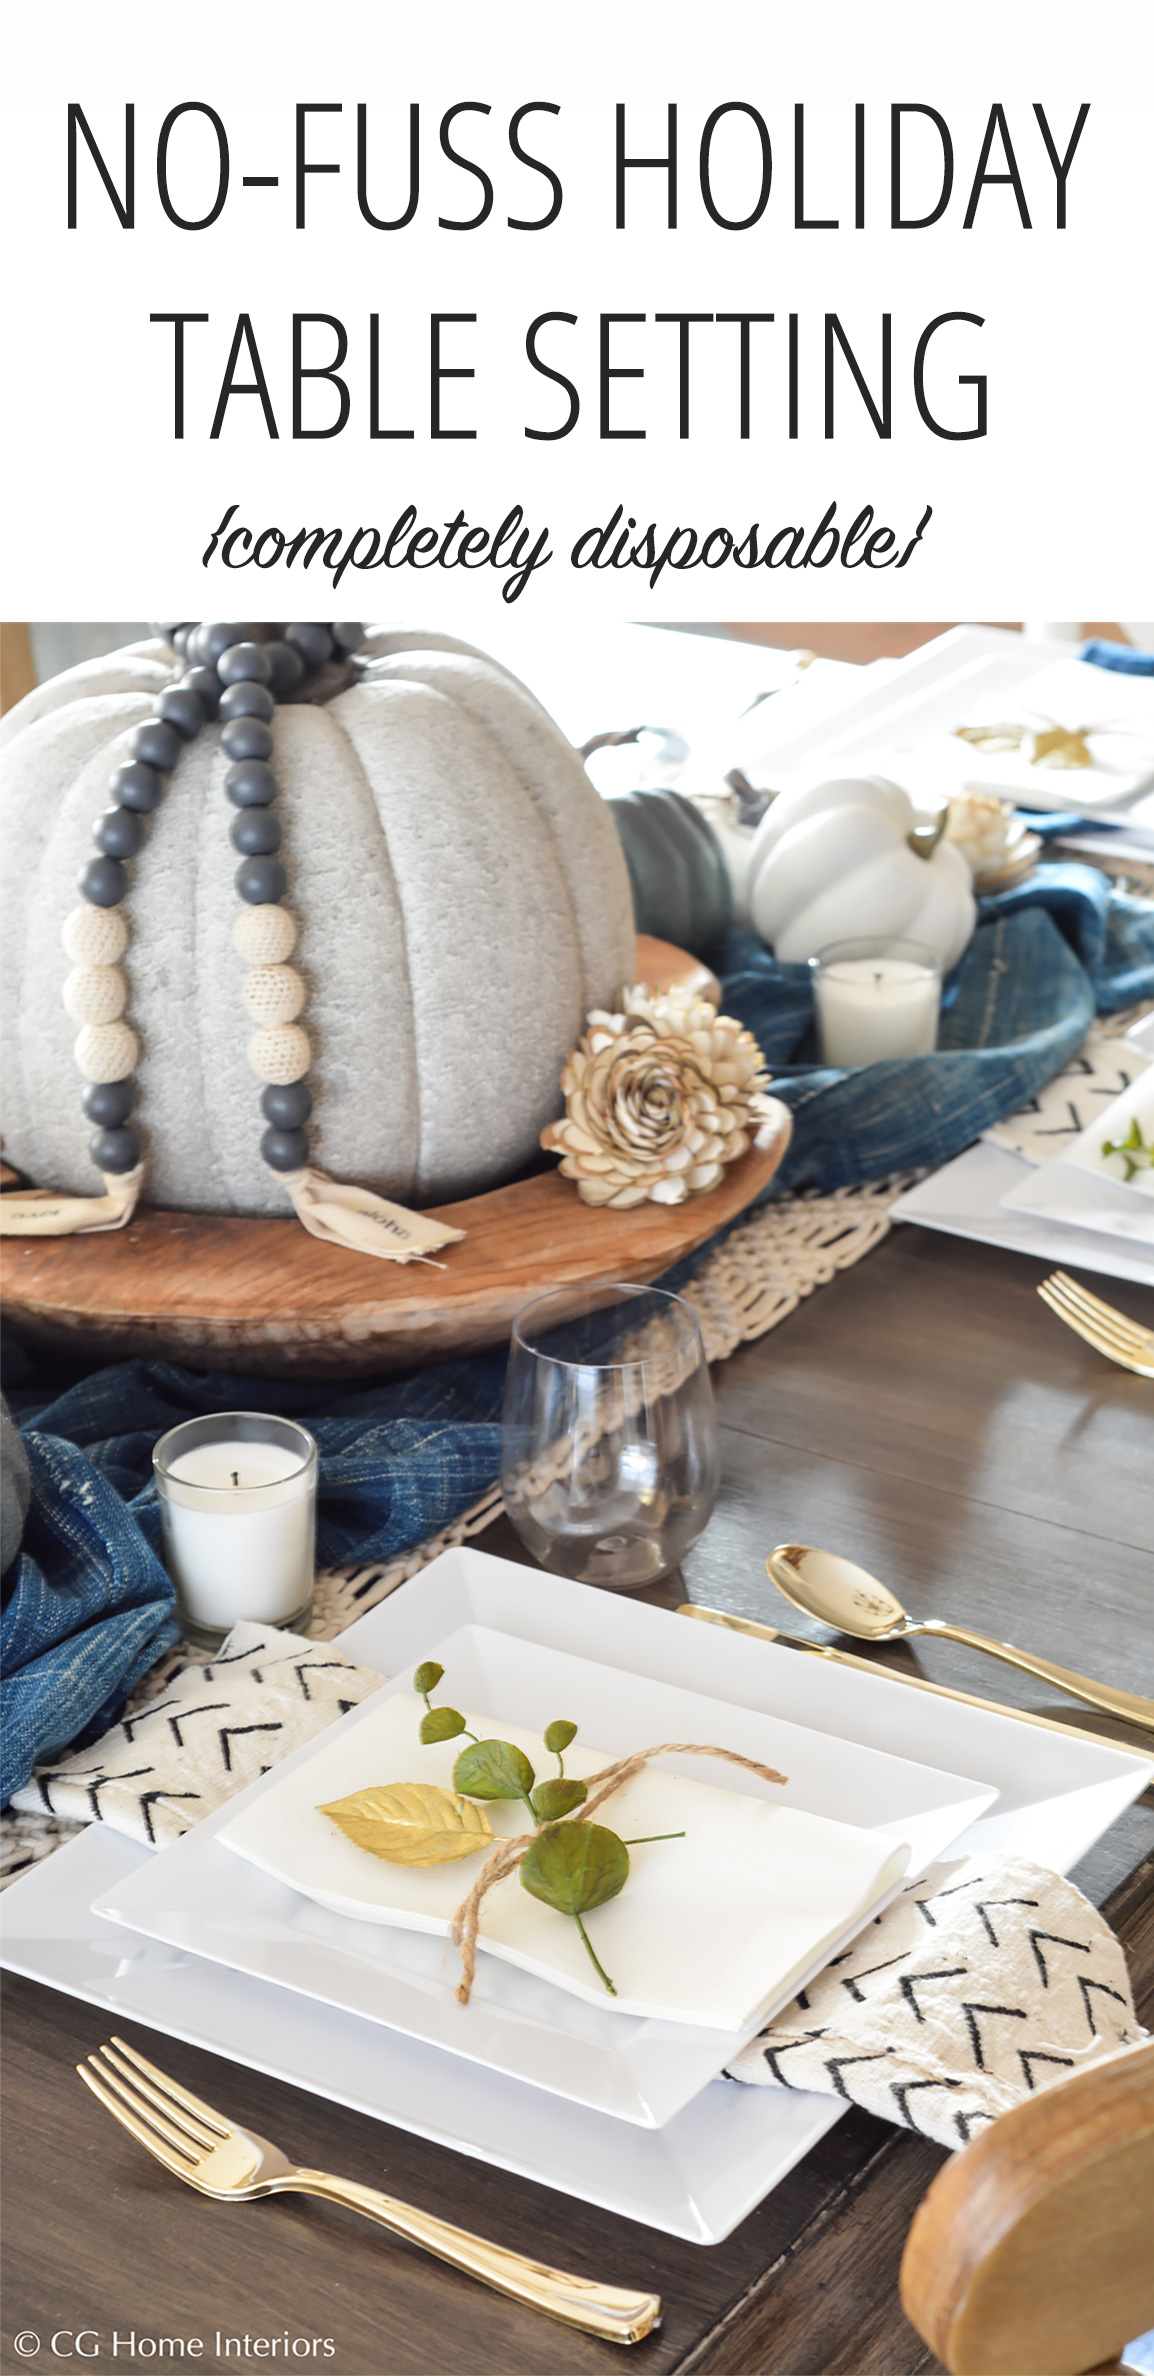 Disposable Holiday Table Setting for Pinterest